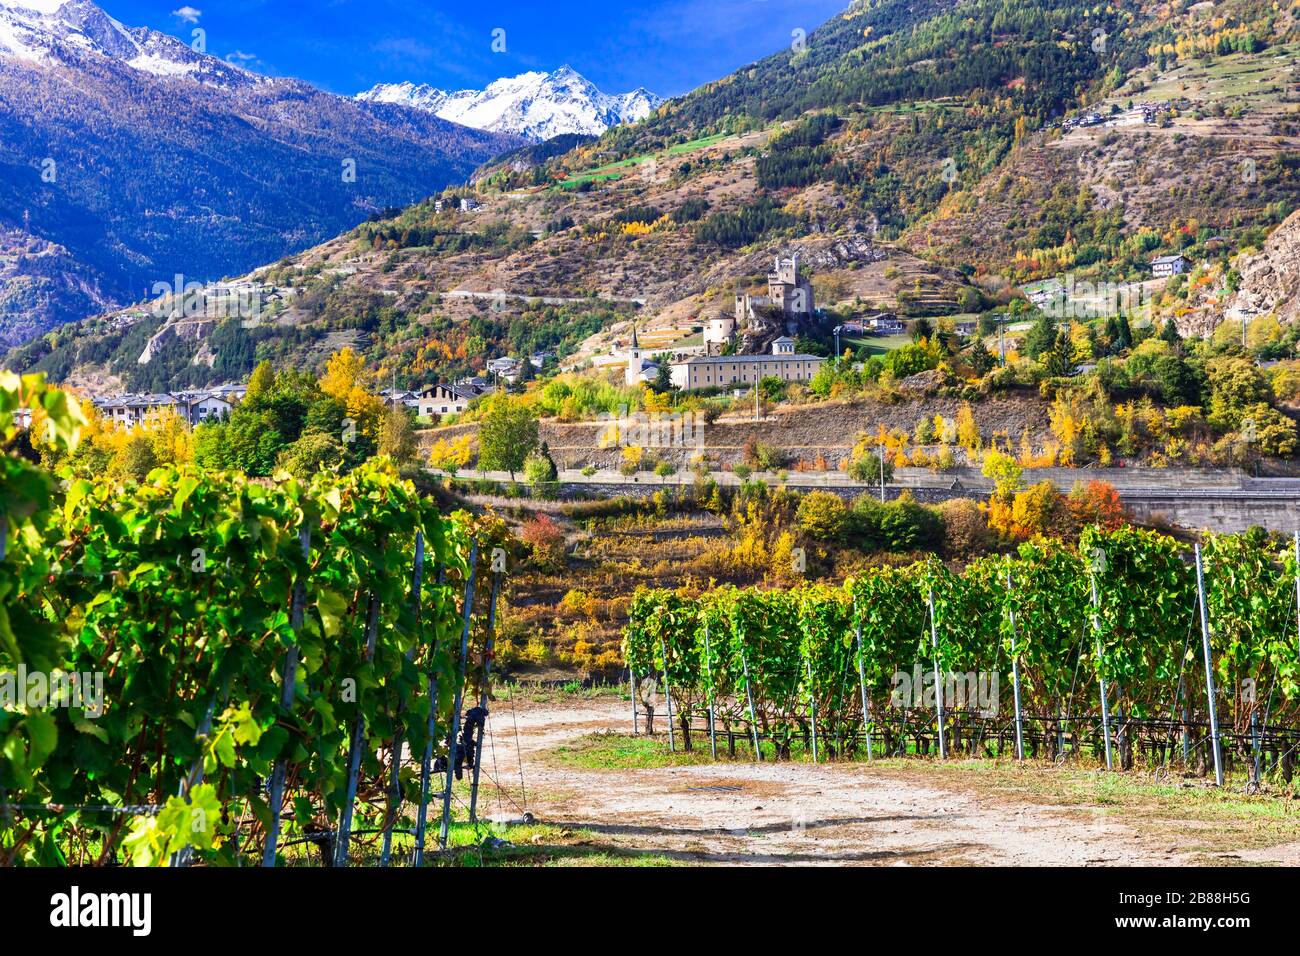 Colorful vineyards and old castle in Valle d’Aosta.North Italy. Stock Photo